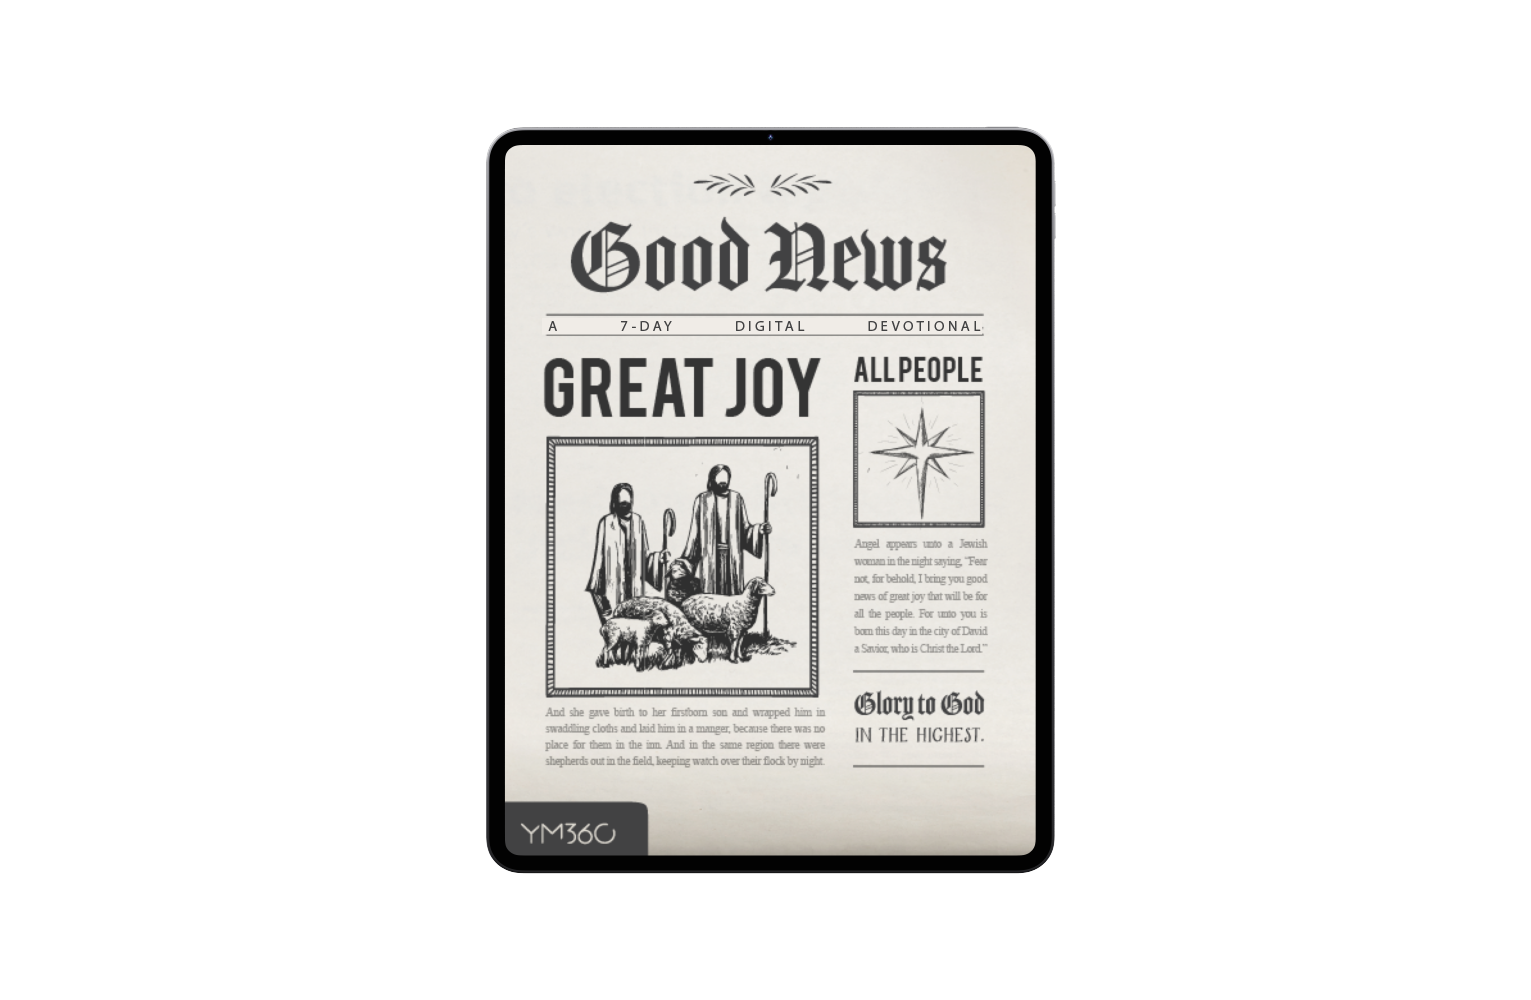 [DOWNLOADABLE VERSION] Good News, Great Joy, All People: A 7-Day Christmas and Advent Devotional